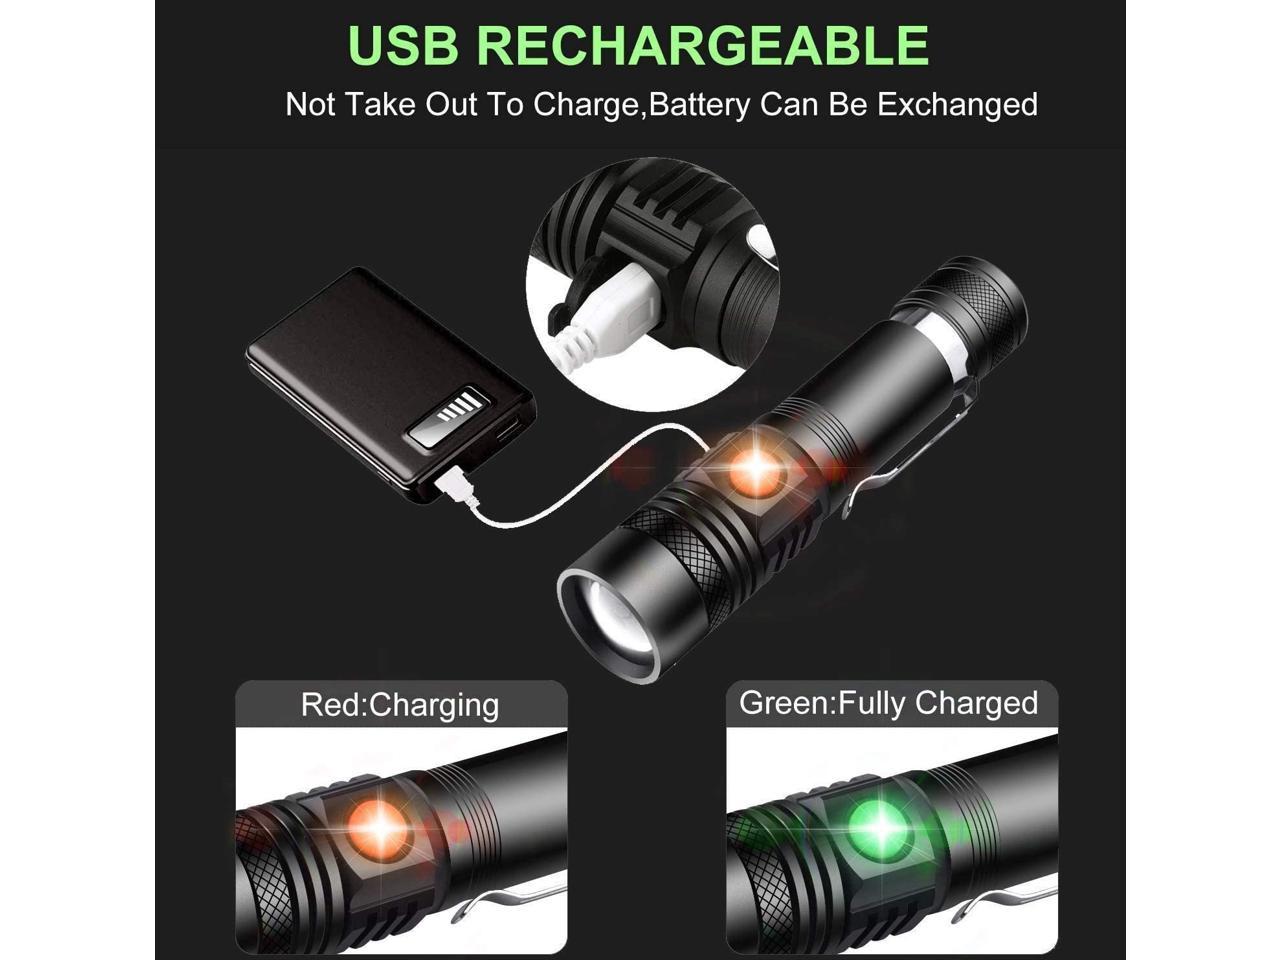 Aomees LED Torch Powerful Flashlight Torches USB Rechargable for Camping 2 